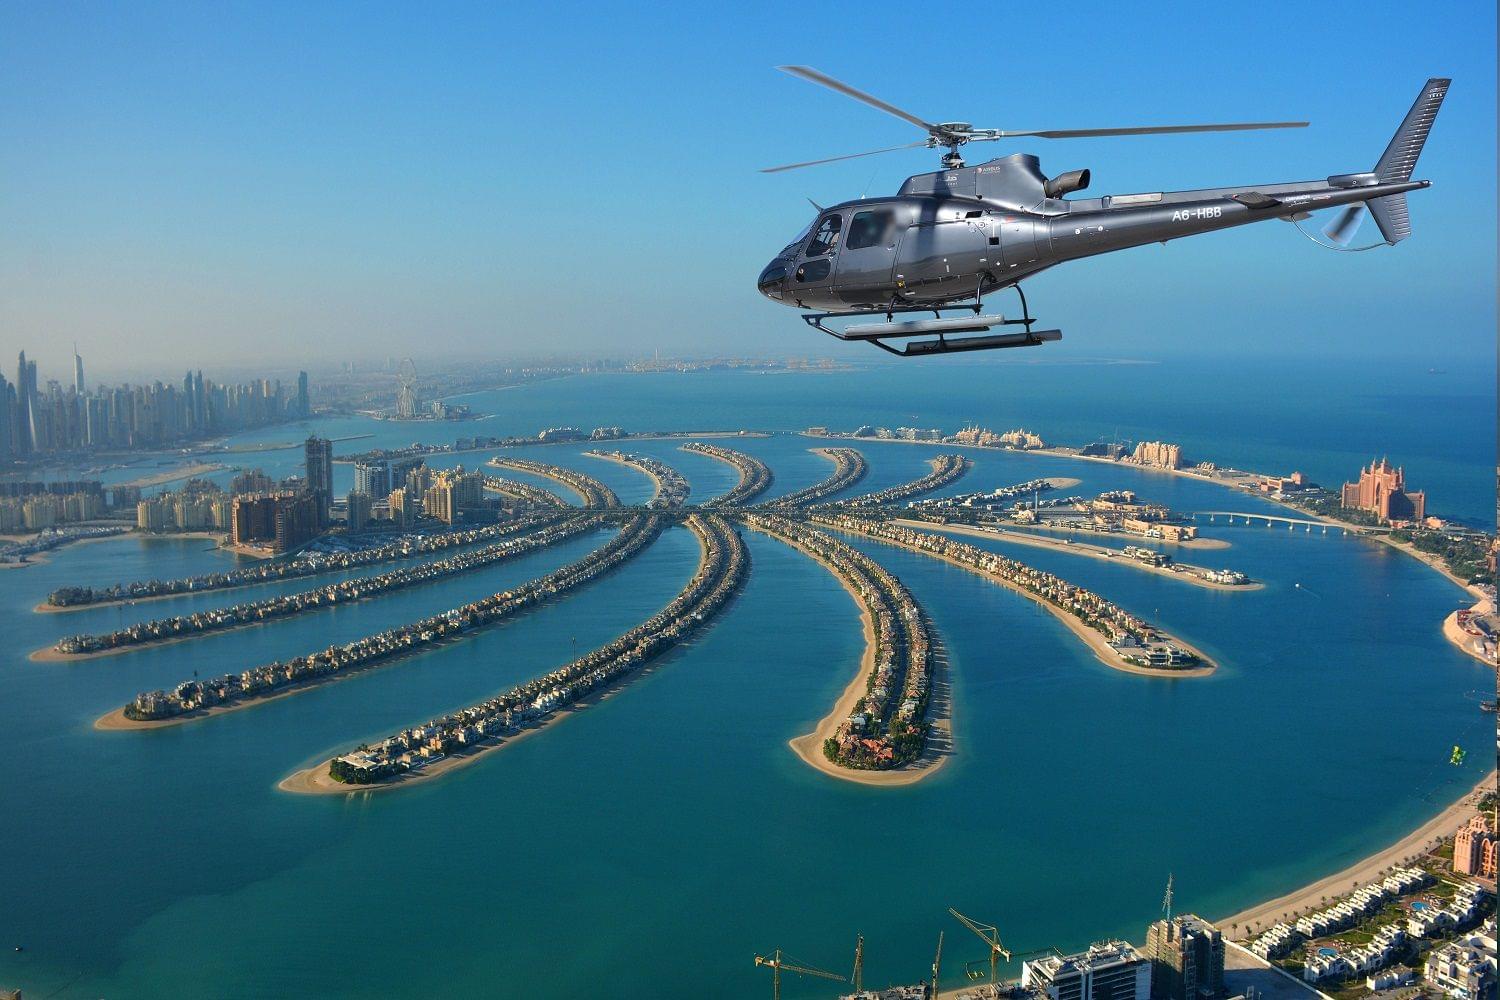 Palm Islands View From Dubai Helicopter Ride